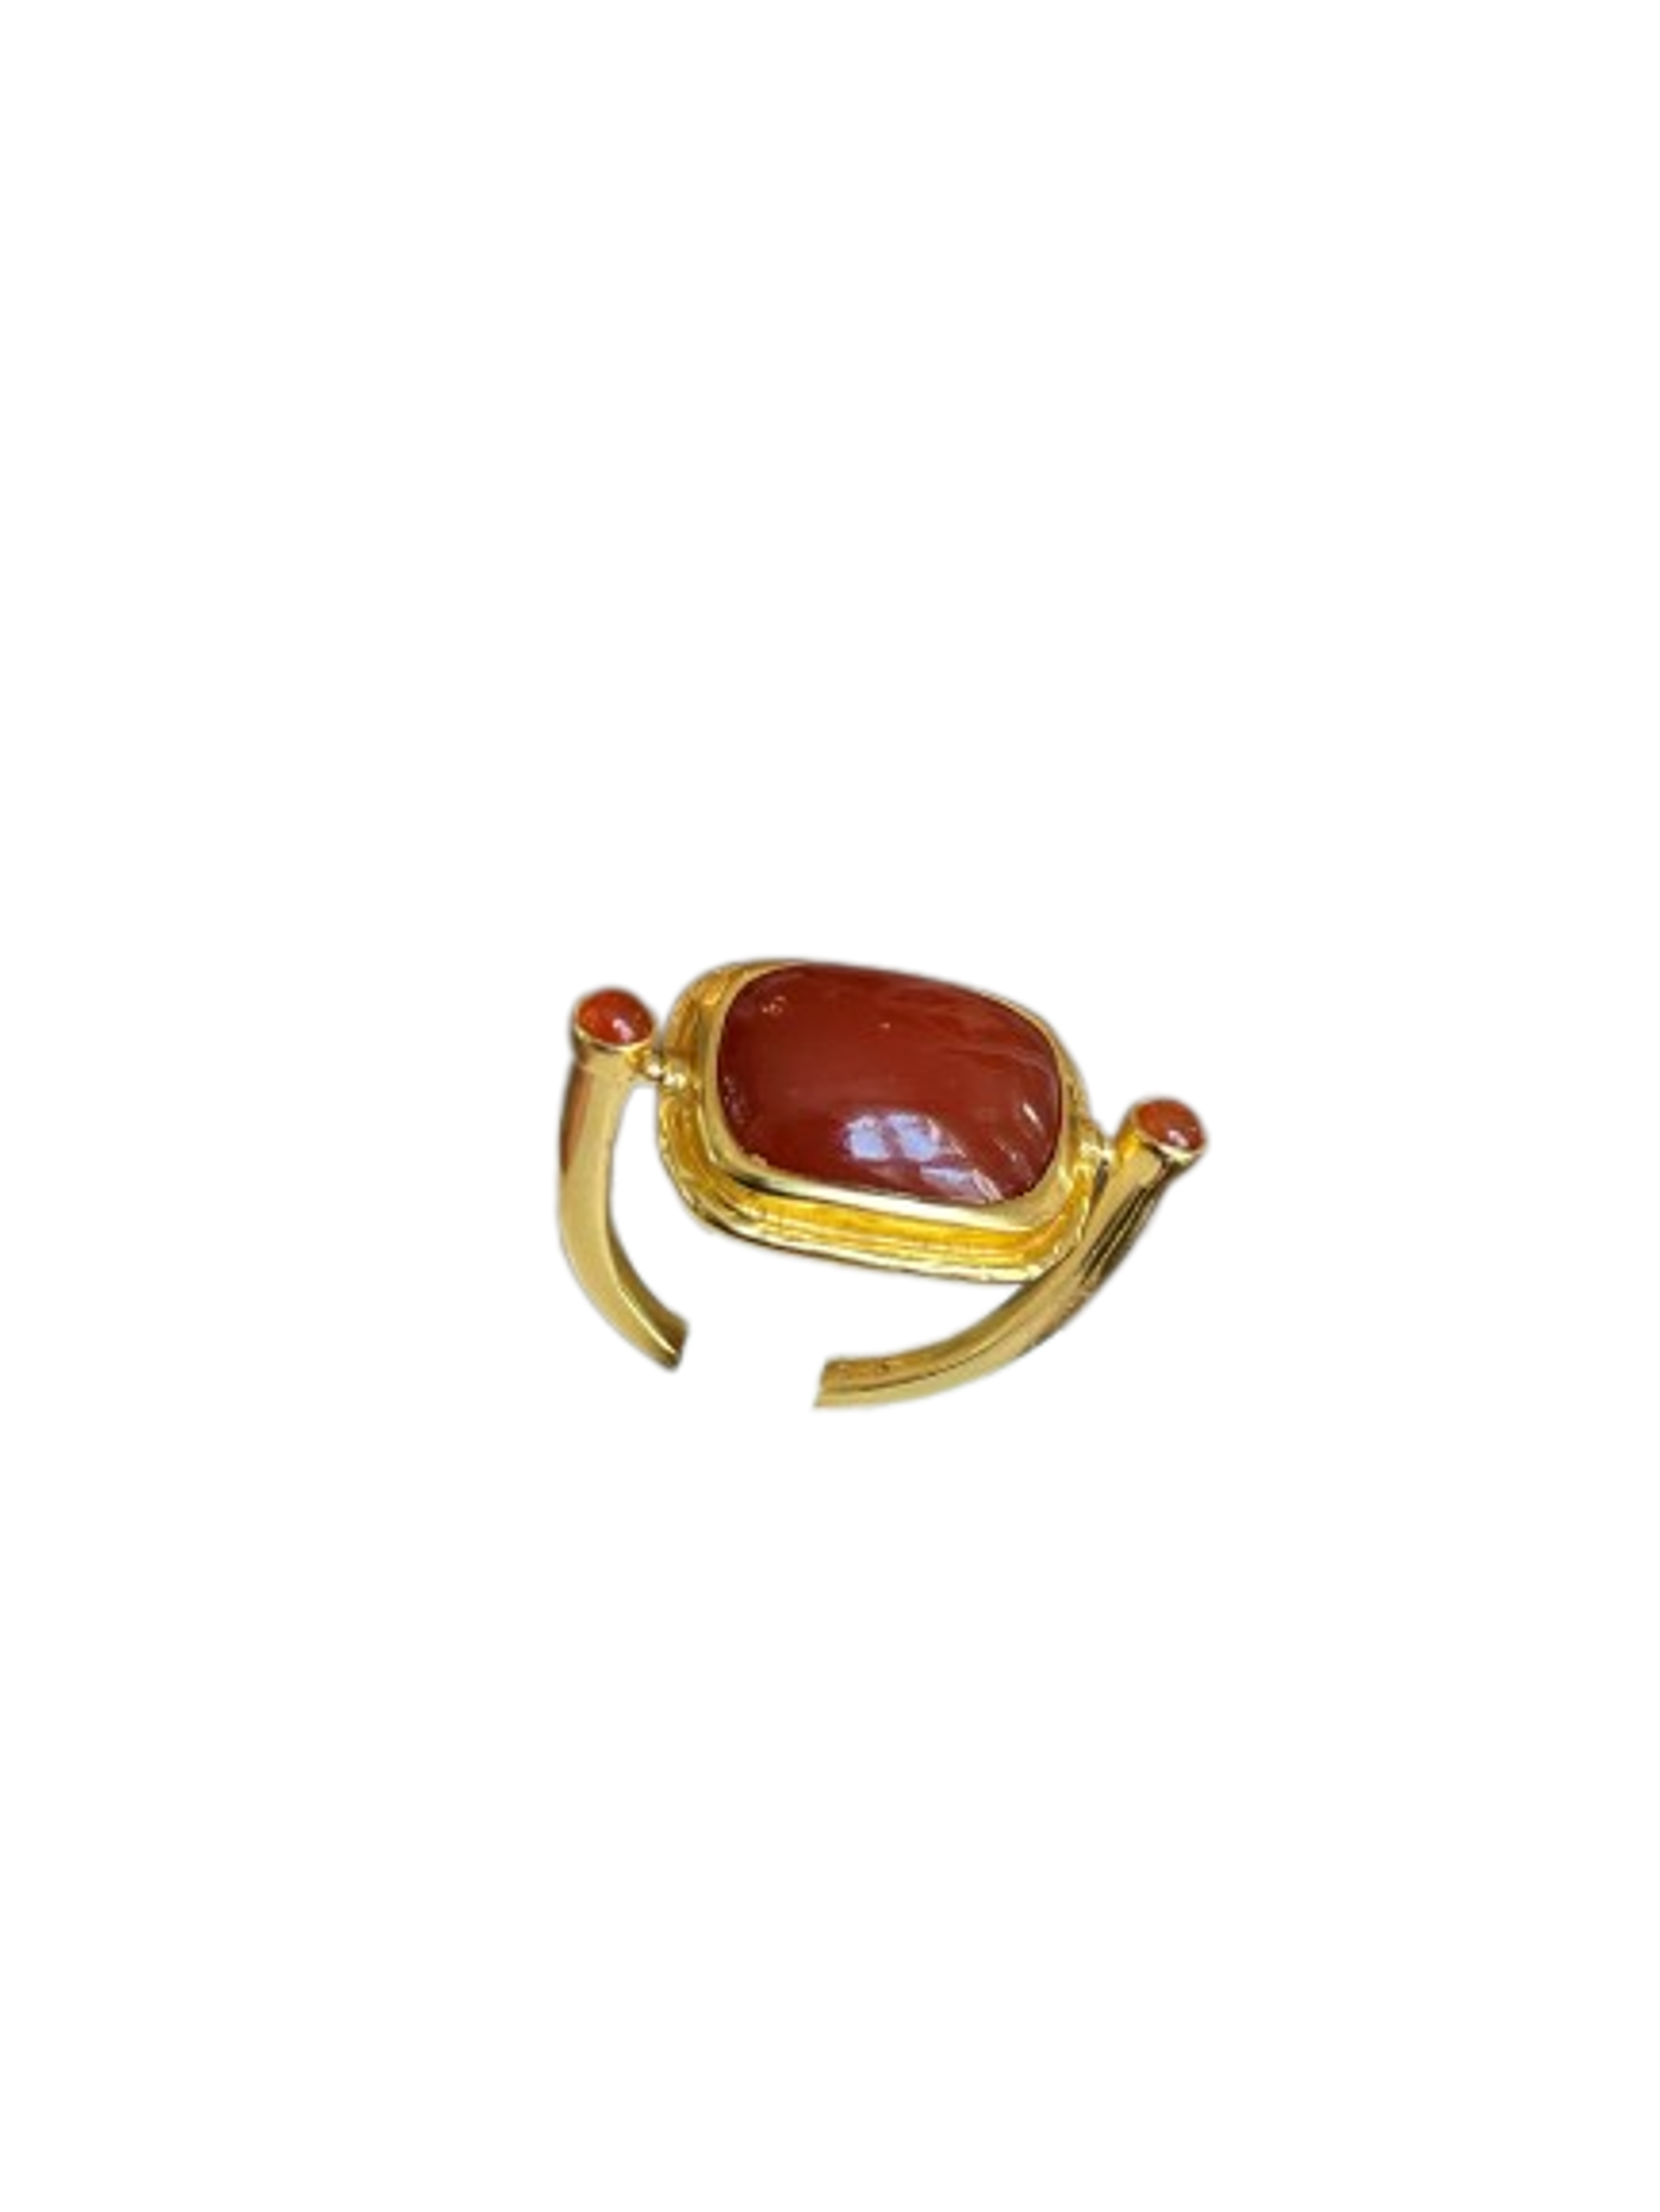 Flip Style Red Onyx Ring by J.Catma